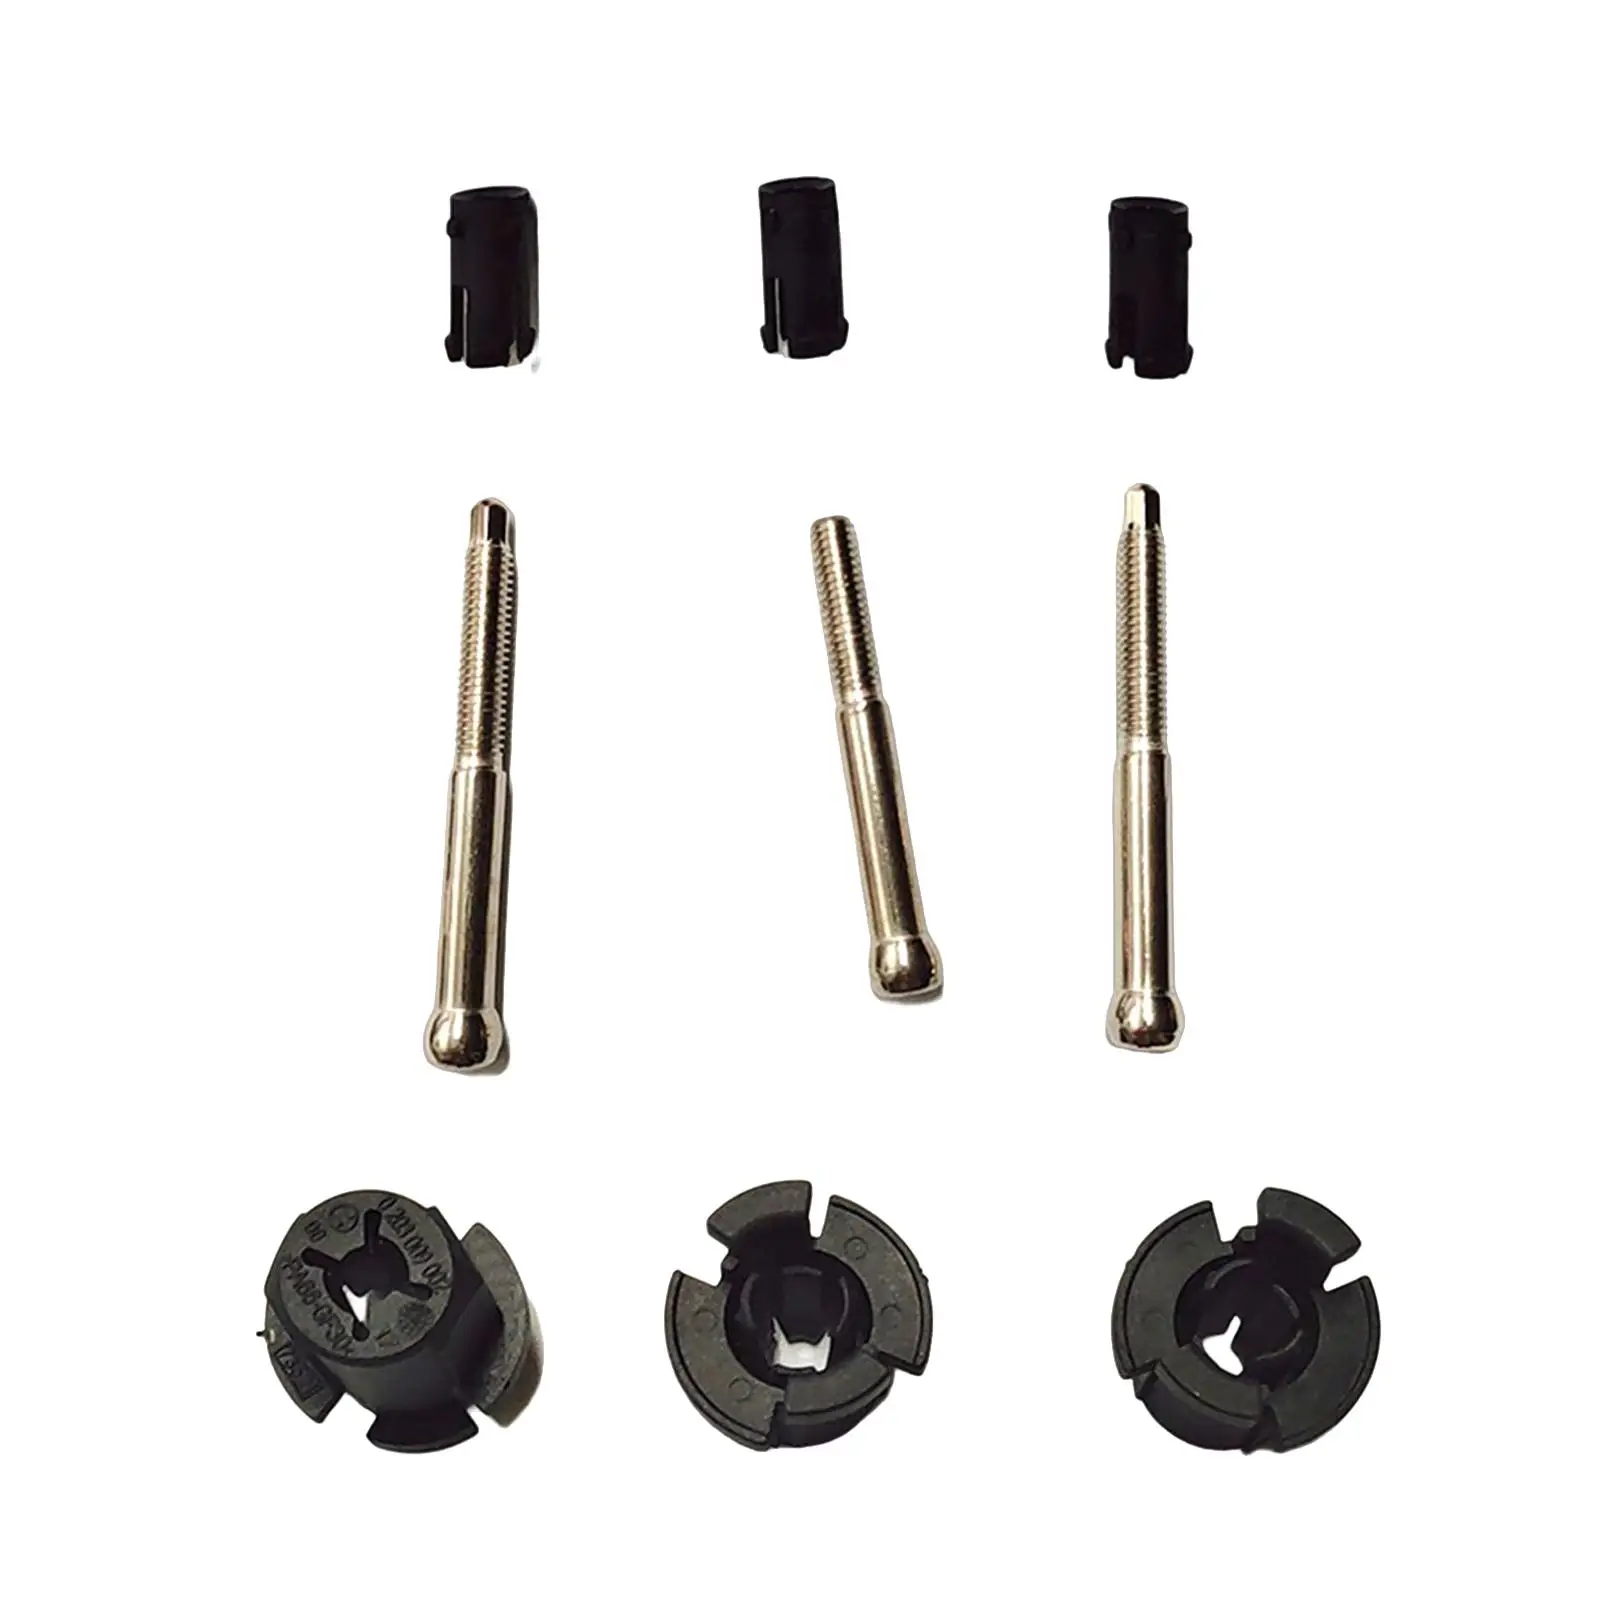 Cruise Control Distance transducer Mounting Repair Kit Durable Replacement for A6L C7